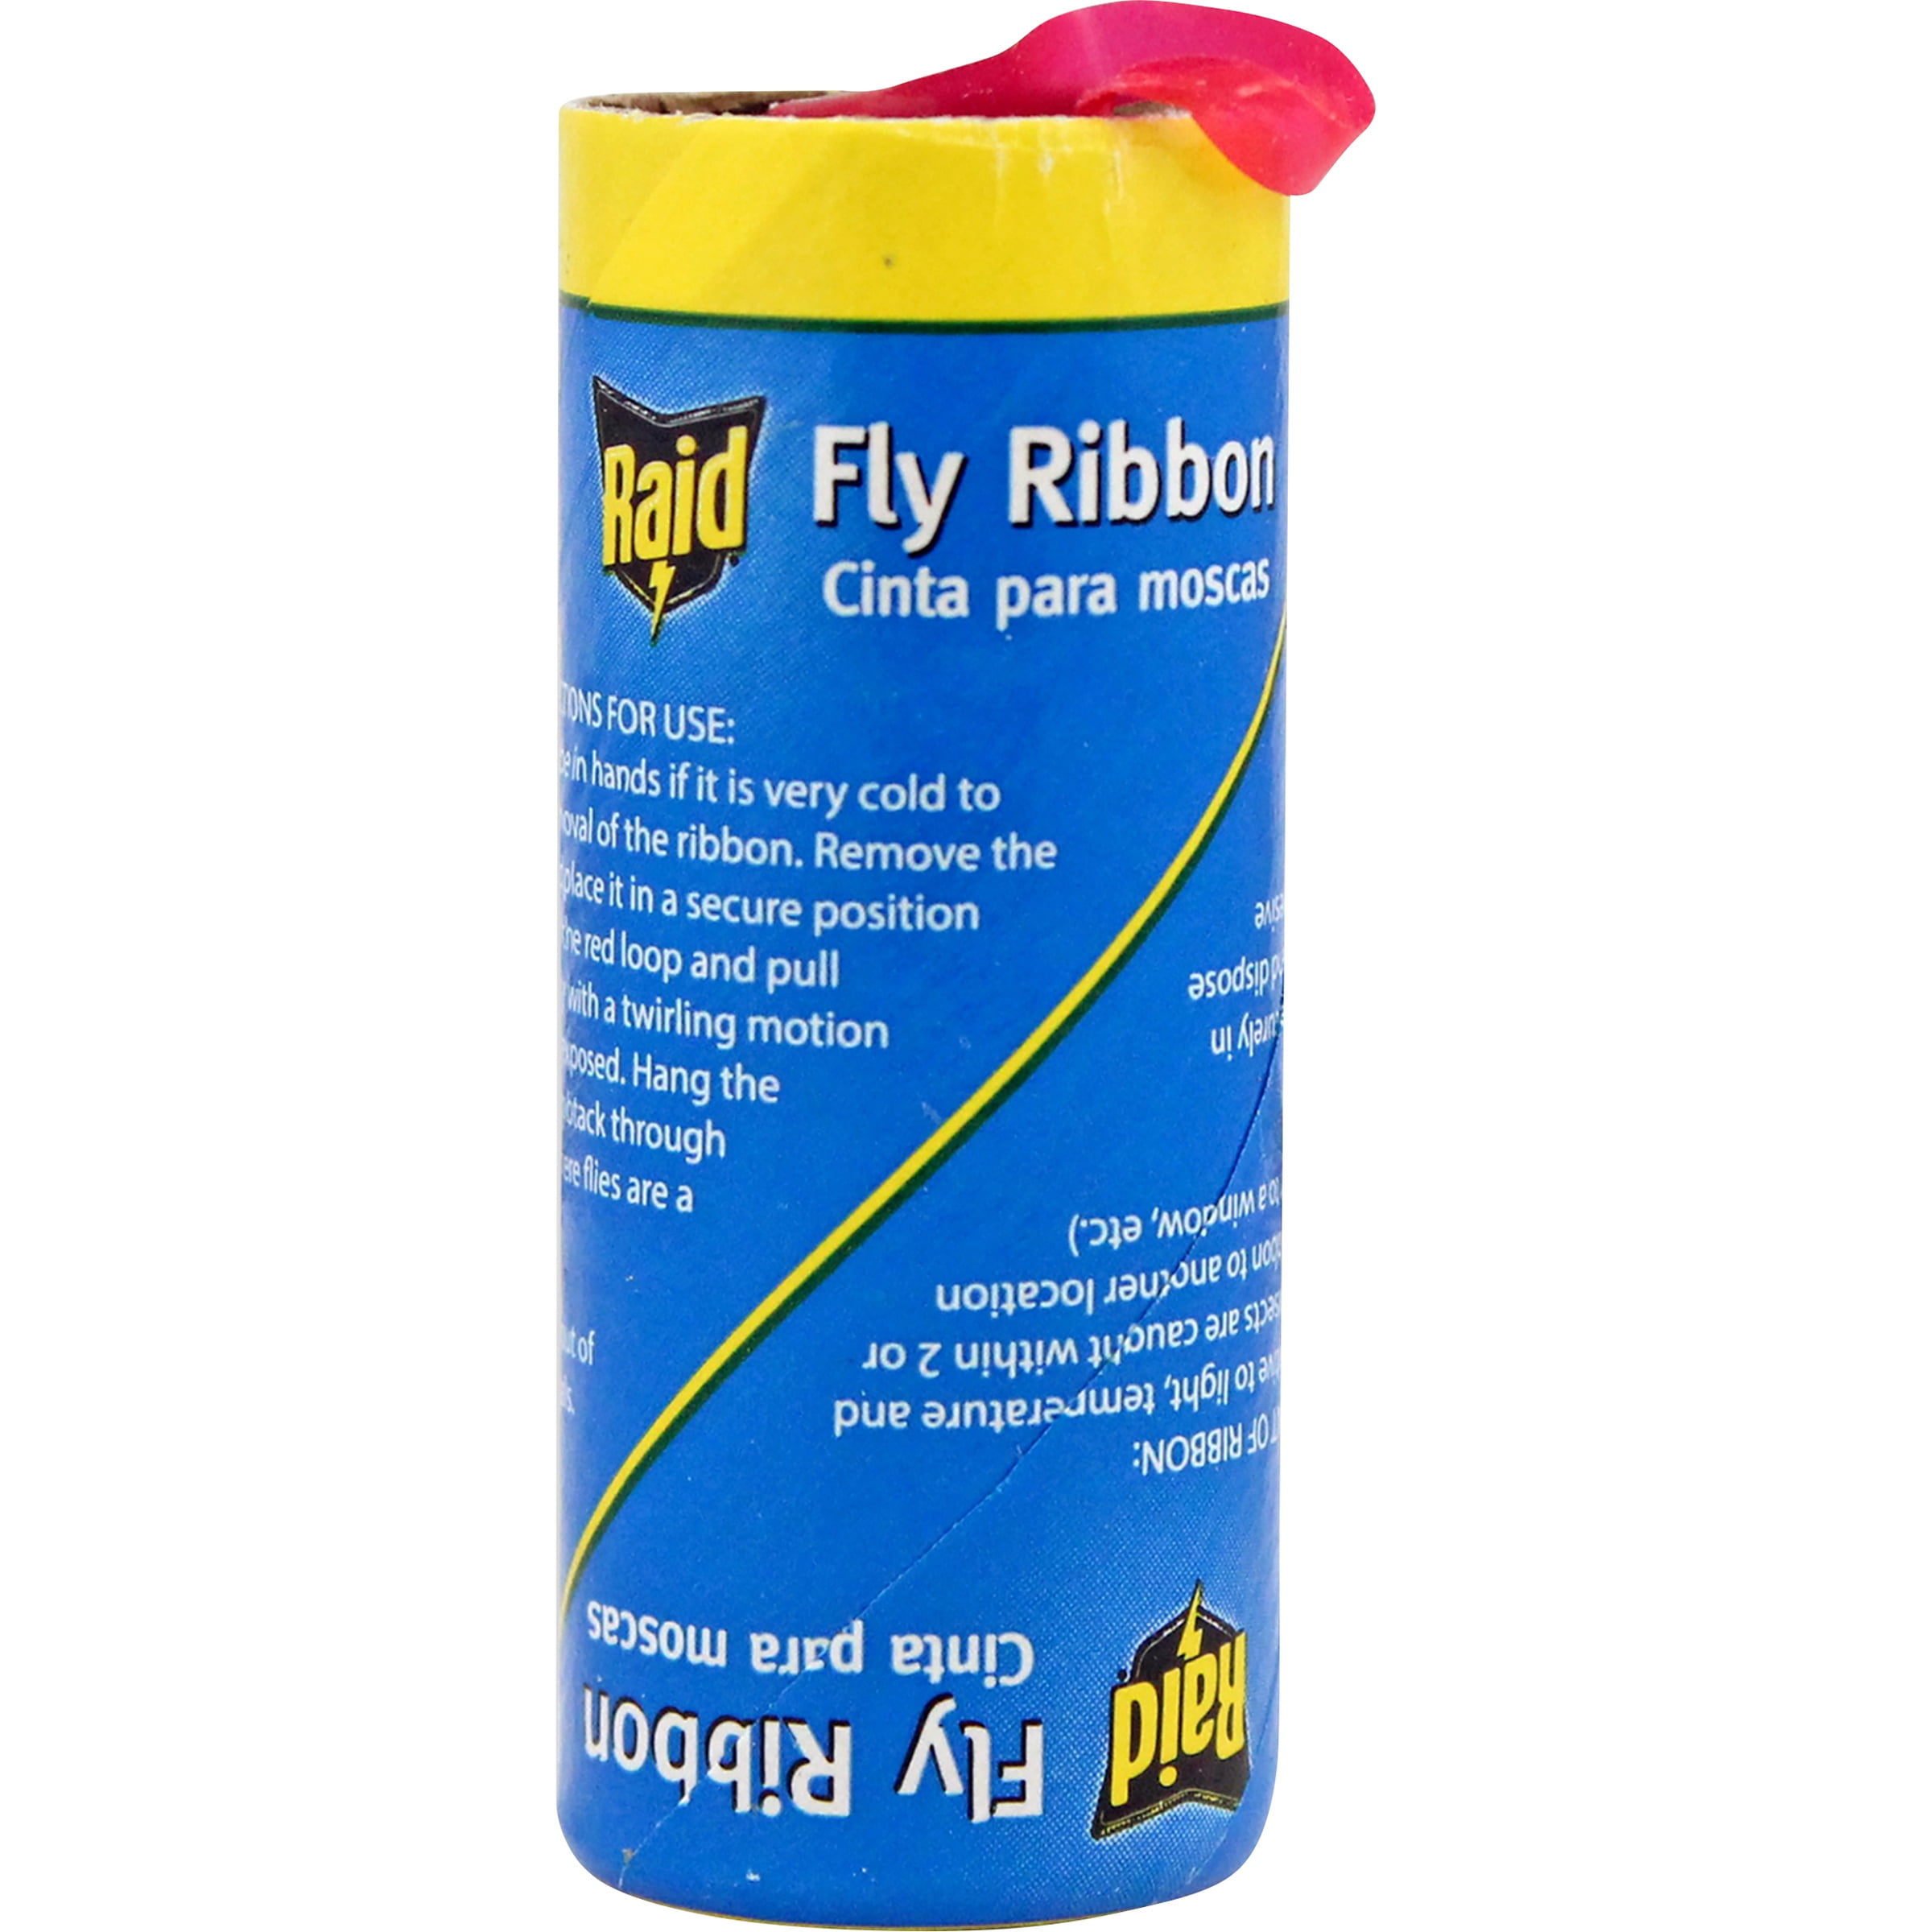 PIC - Raid Fly Ribbon Traps Files Gnats Moths & Other Flying Insects 10  Pack (10 count)